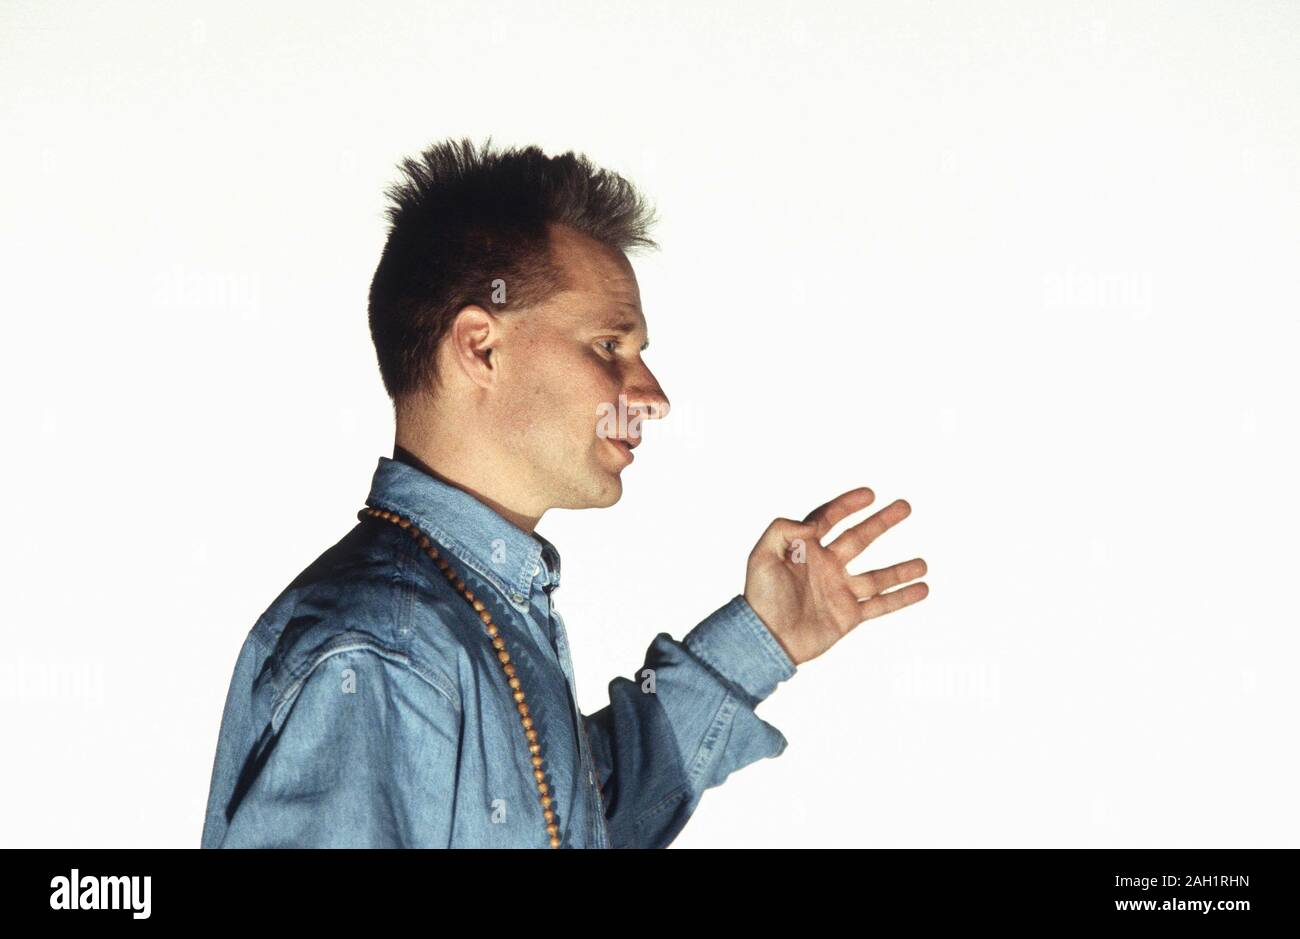 Peter Sellars (born 1957) American theatre and opera director photographed at a rehearsal of ‘The Merchant of Venice’ by Shakespeare presented by the Goodman Theatre Company of Chicago at the Barbican Theatre, London in 1994 Stock Photo